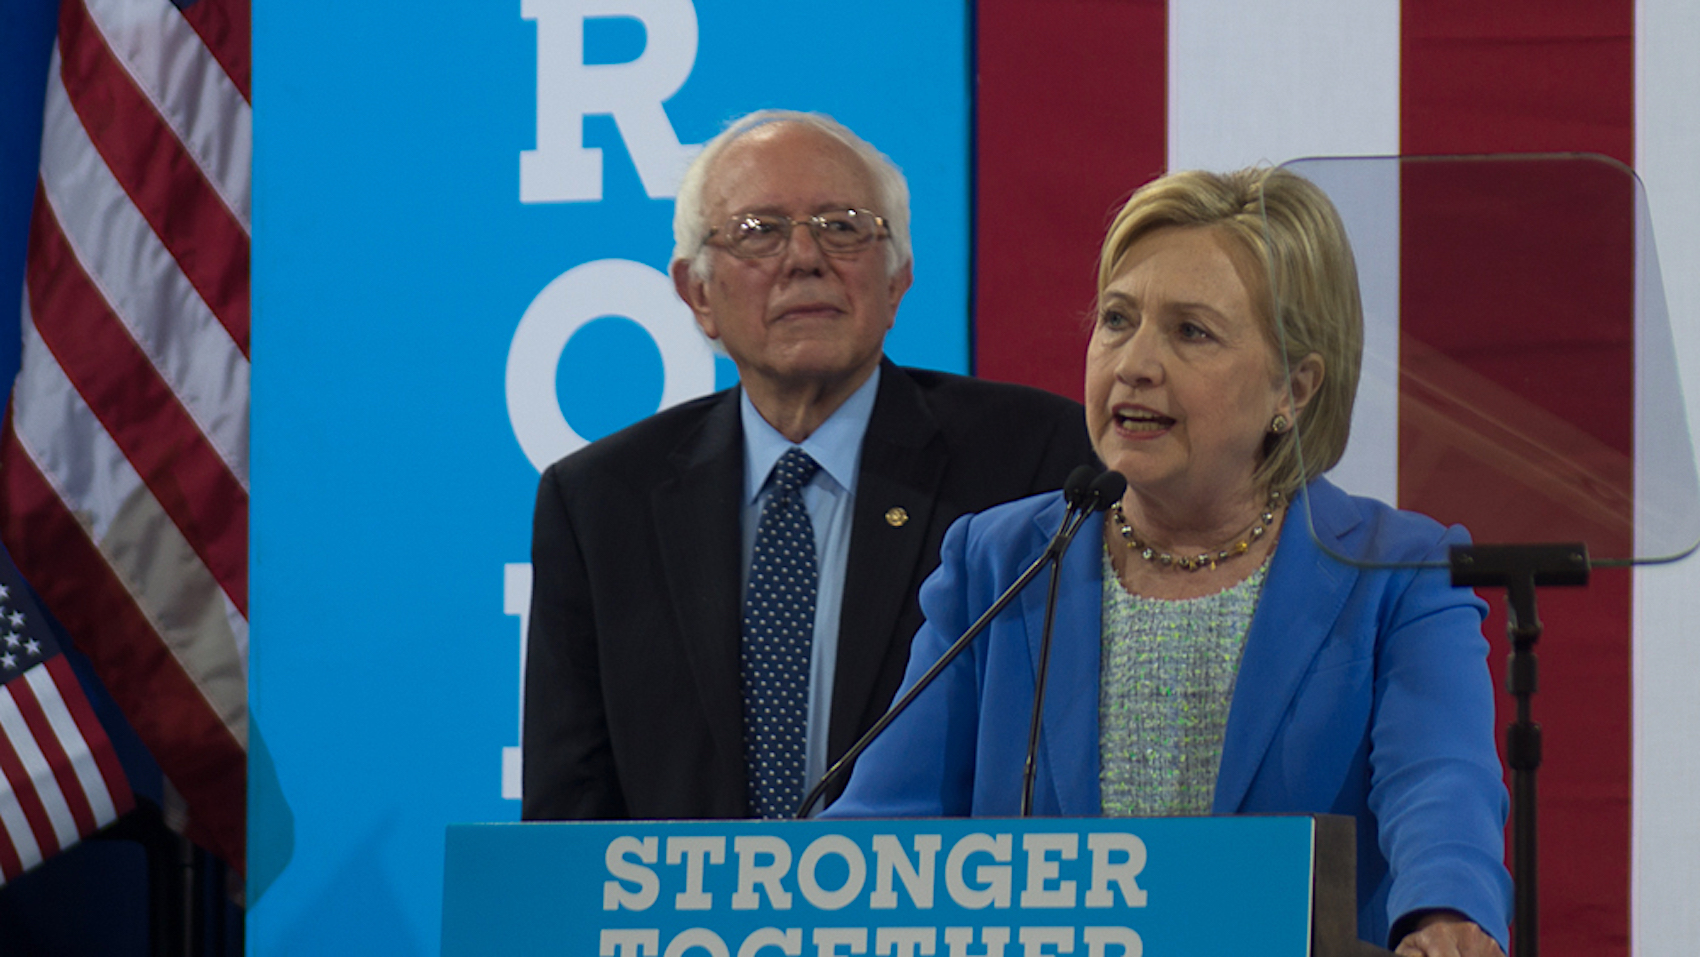 Hillary Clinton speaking at a podium with Bernie Sanders standing behind